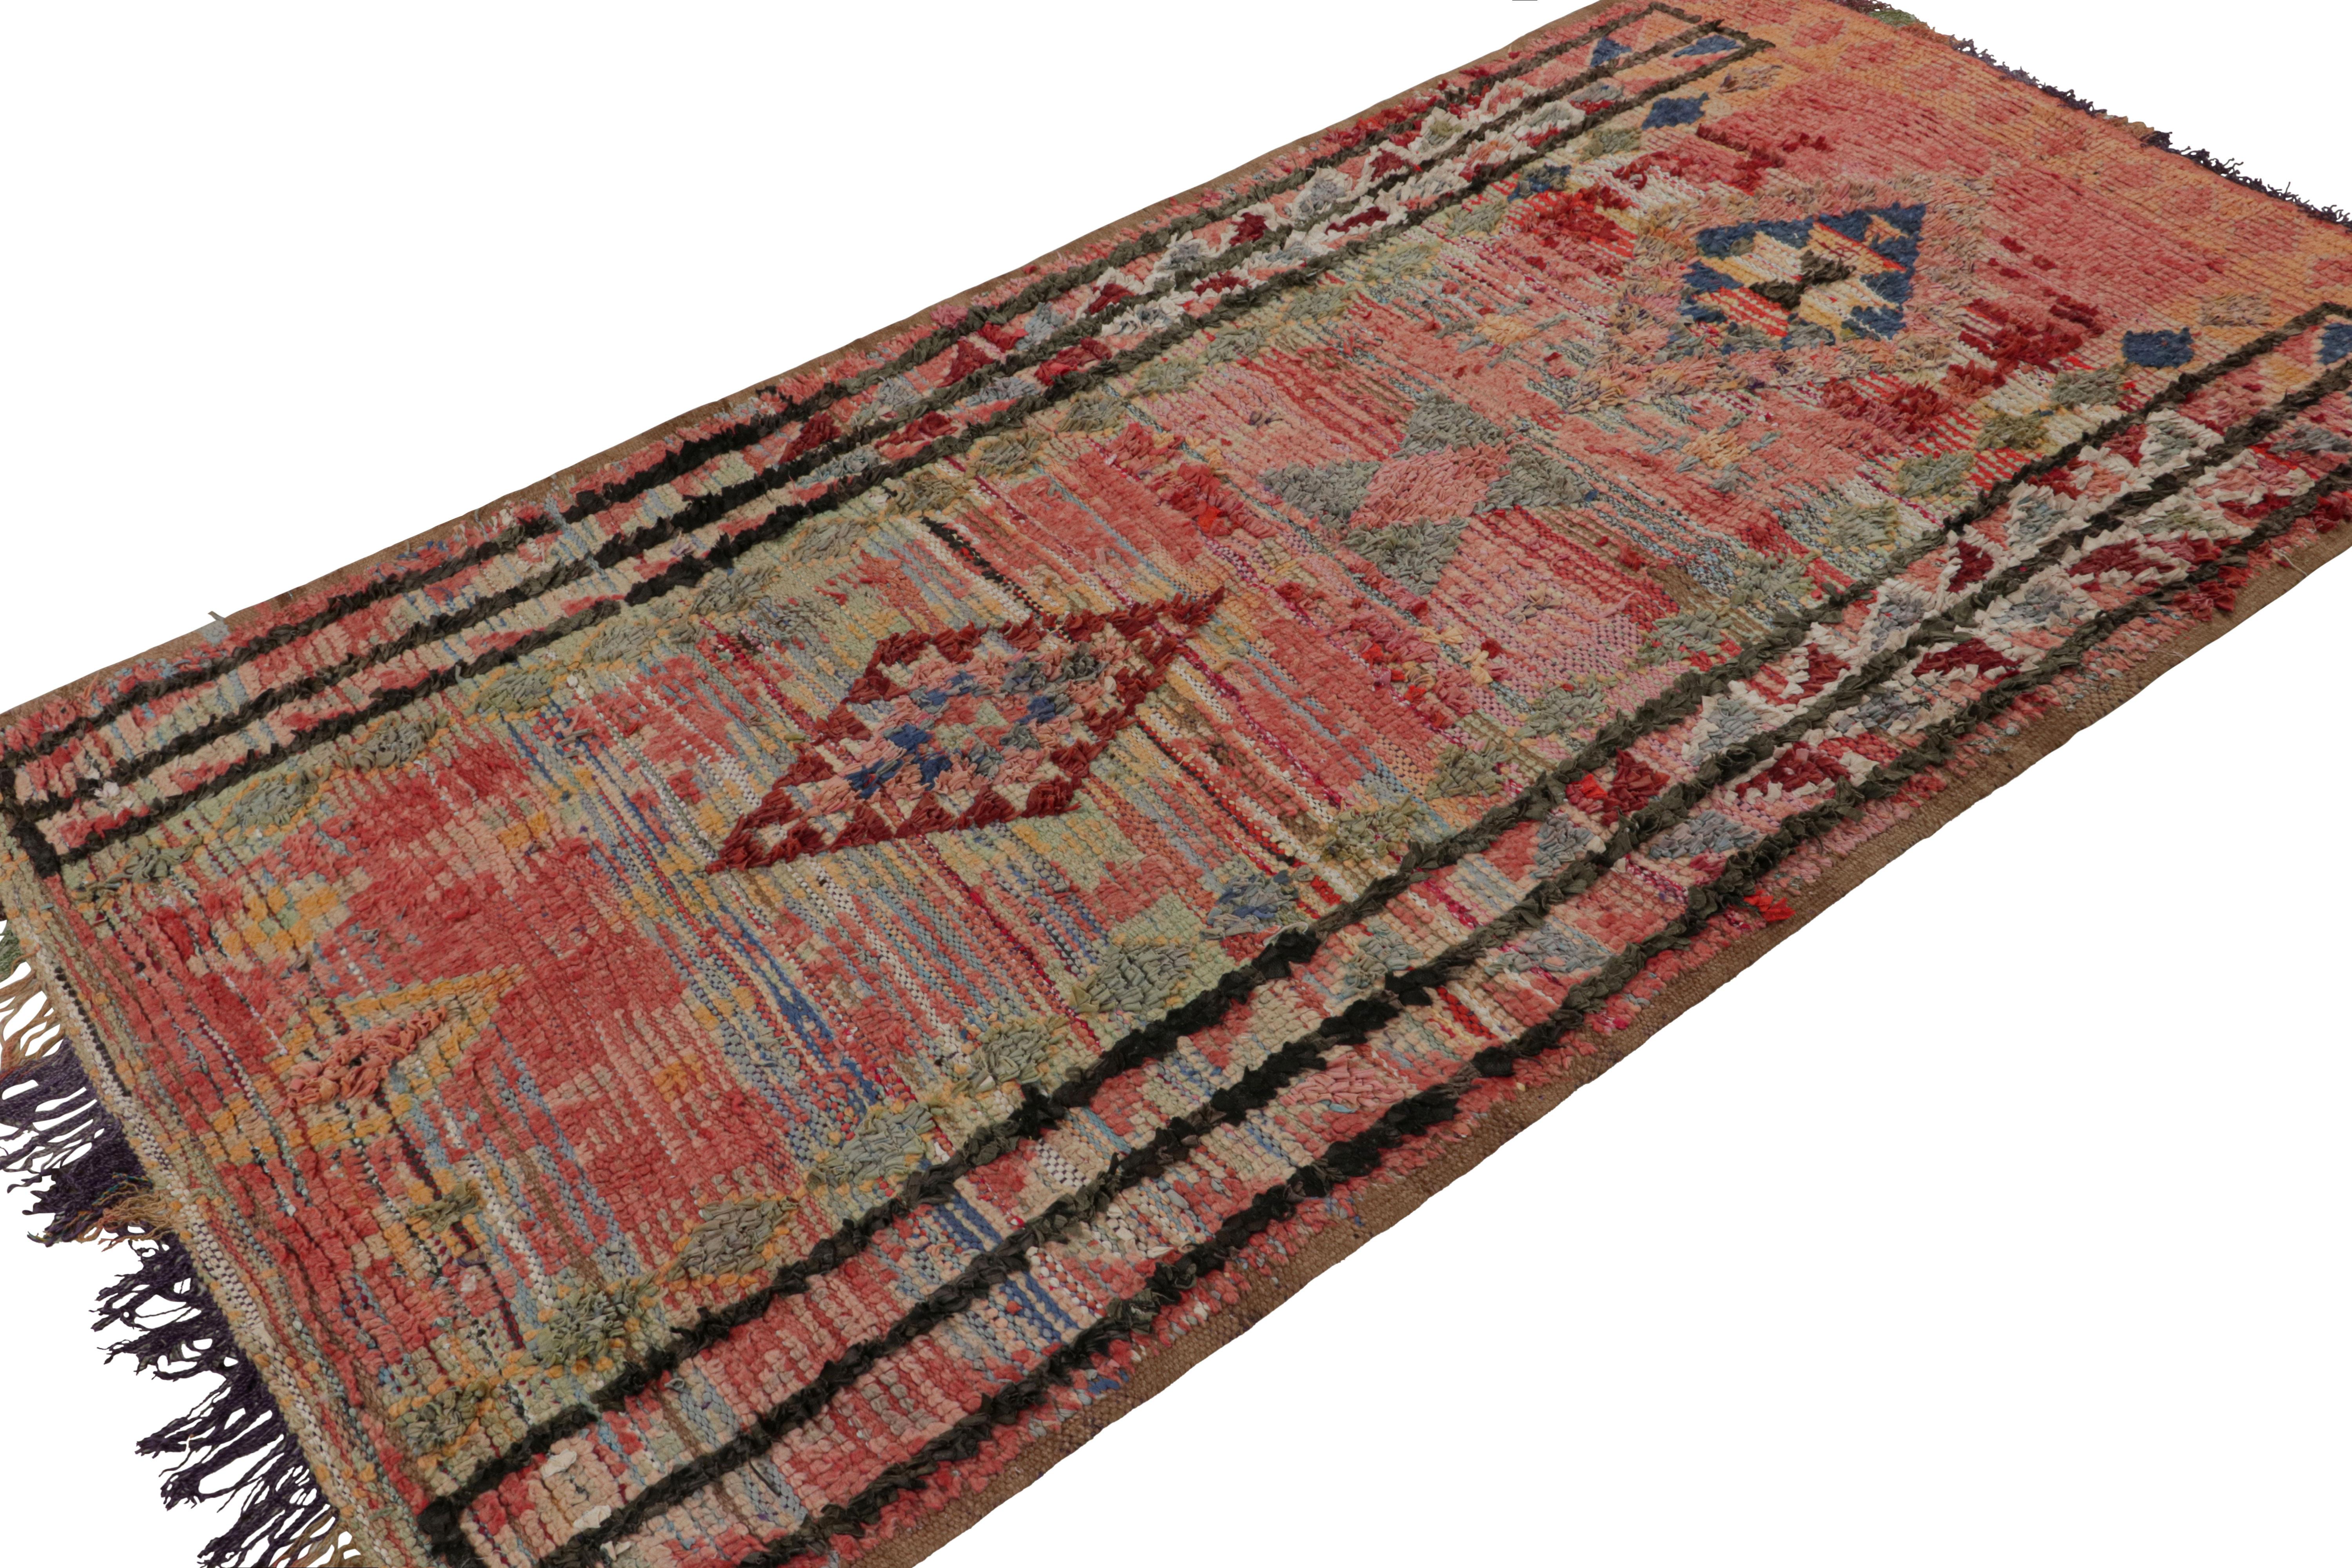 Hand-knotted in wool circa 1950-1960, this 4x8 vintage Moroccan rug with polychromatic geometric patterns and medallions, hails from the Azilal tribe.  

On the Design: 

Connoisseurs may admire this runner as a bold, graphic piece with drama and